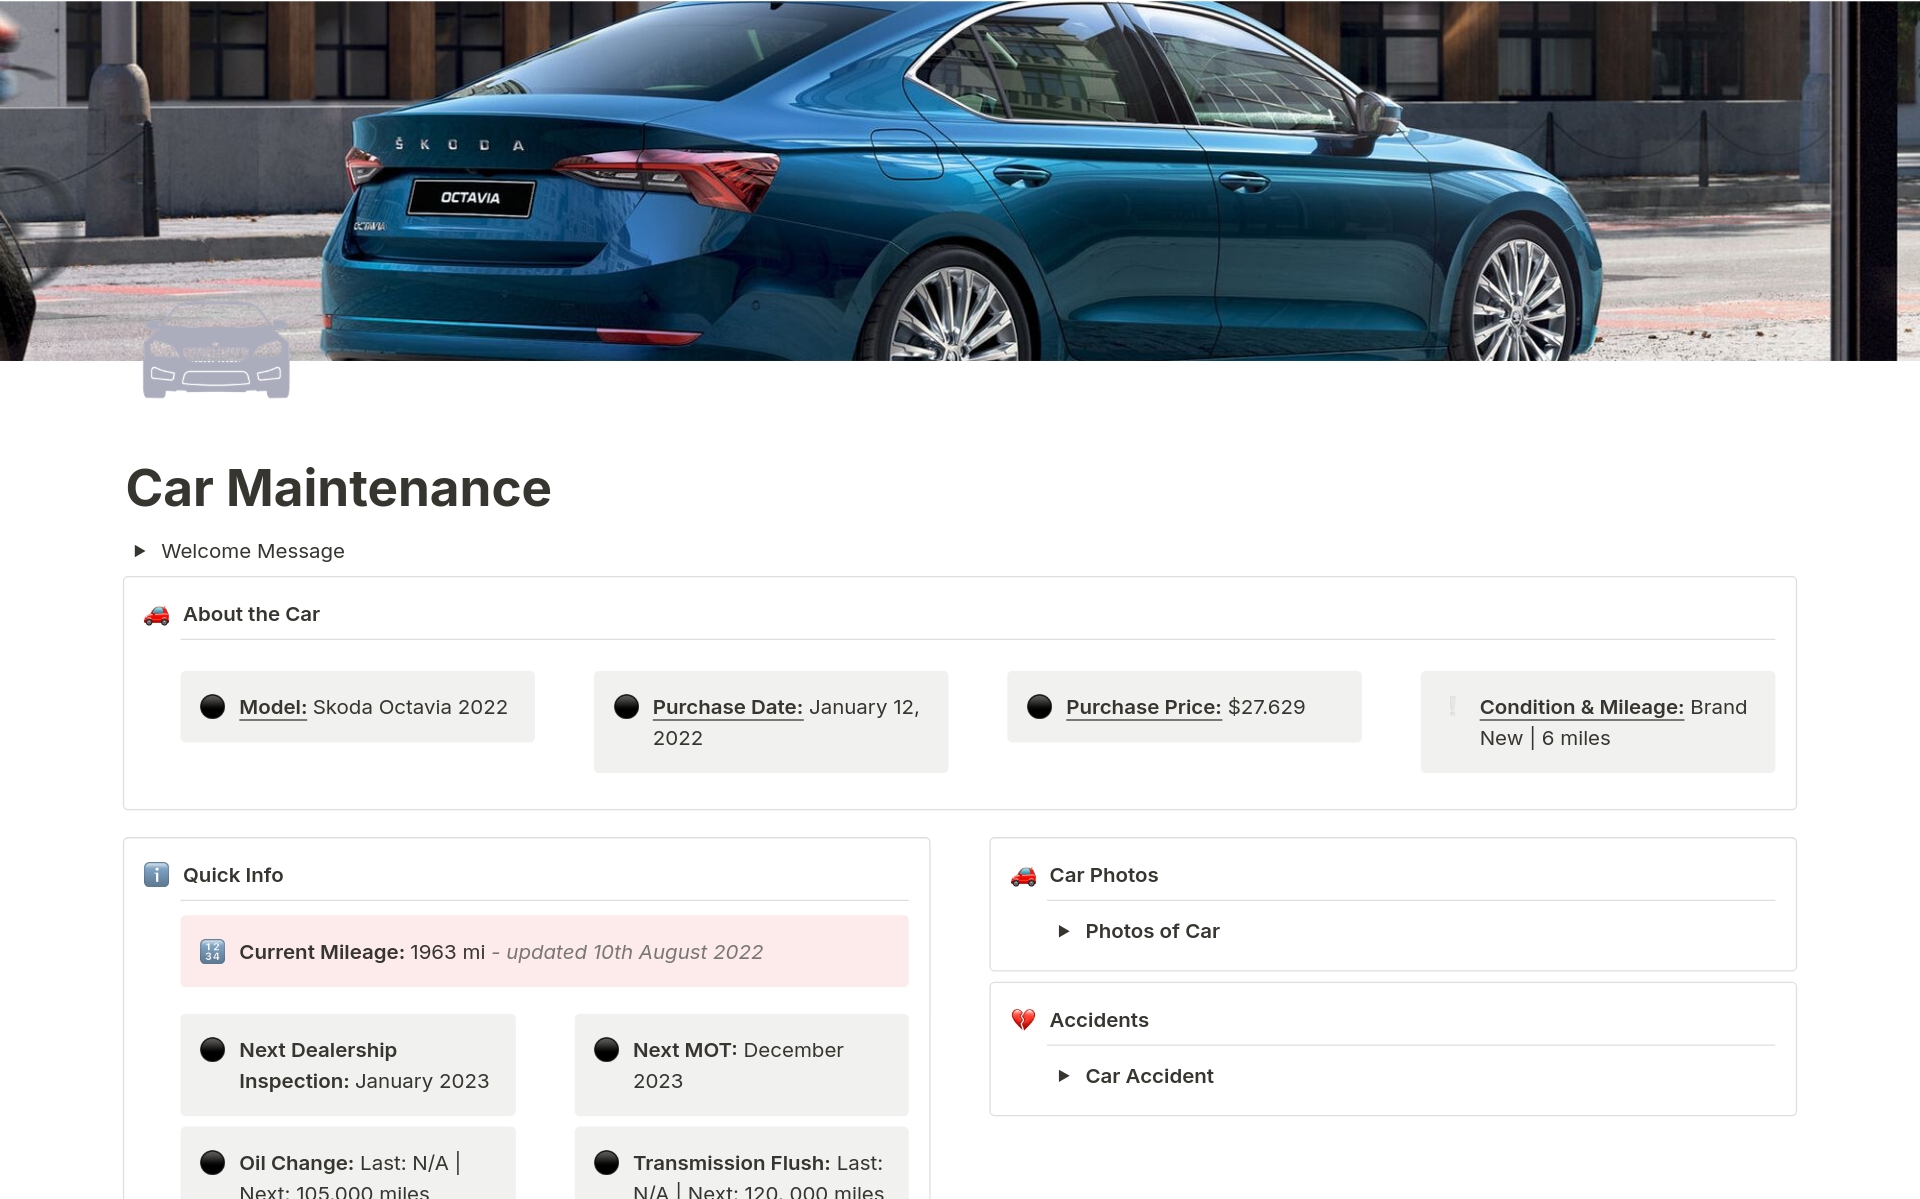 What you can do:

Add Basic Info About Your Car

Keep Track of Mileage, Oil changes & more

Keep Track of Your Service Log

Create a Photo Gallery

Write down Your Service Information

Databases Inside:

Service Log